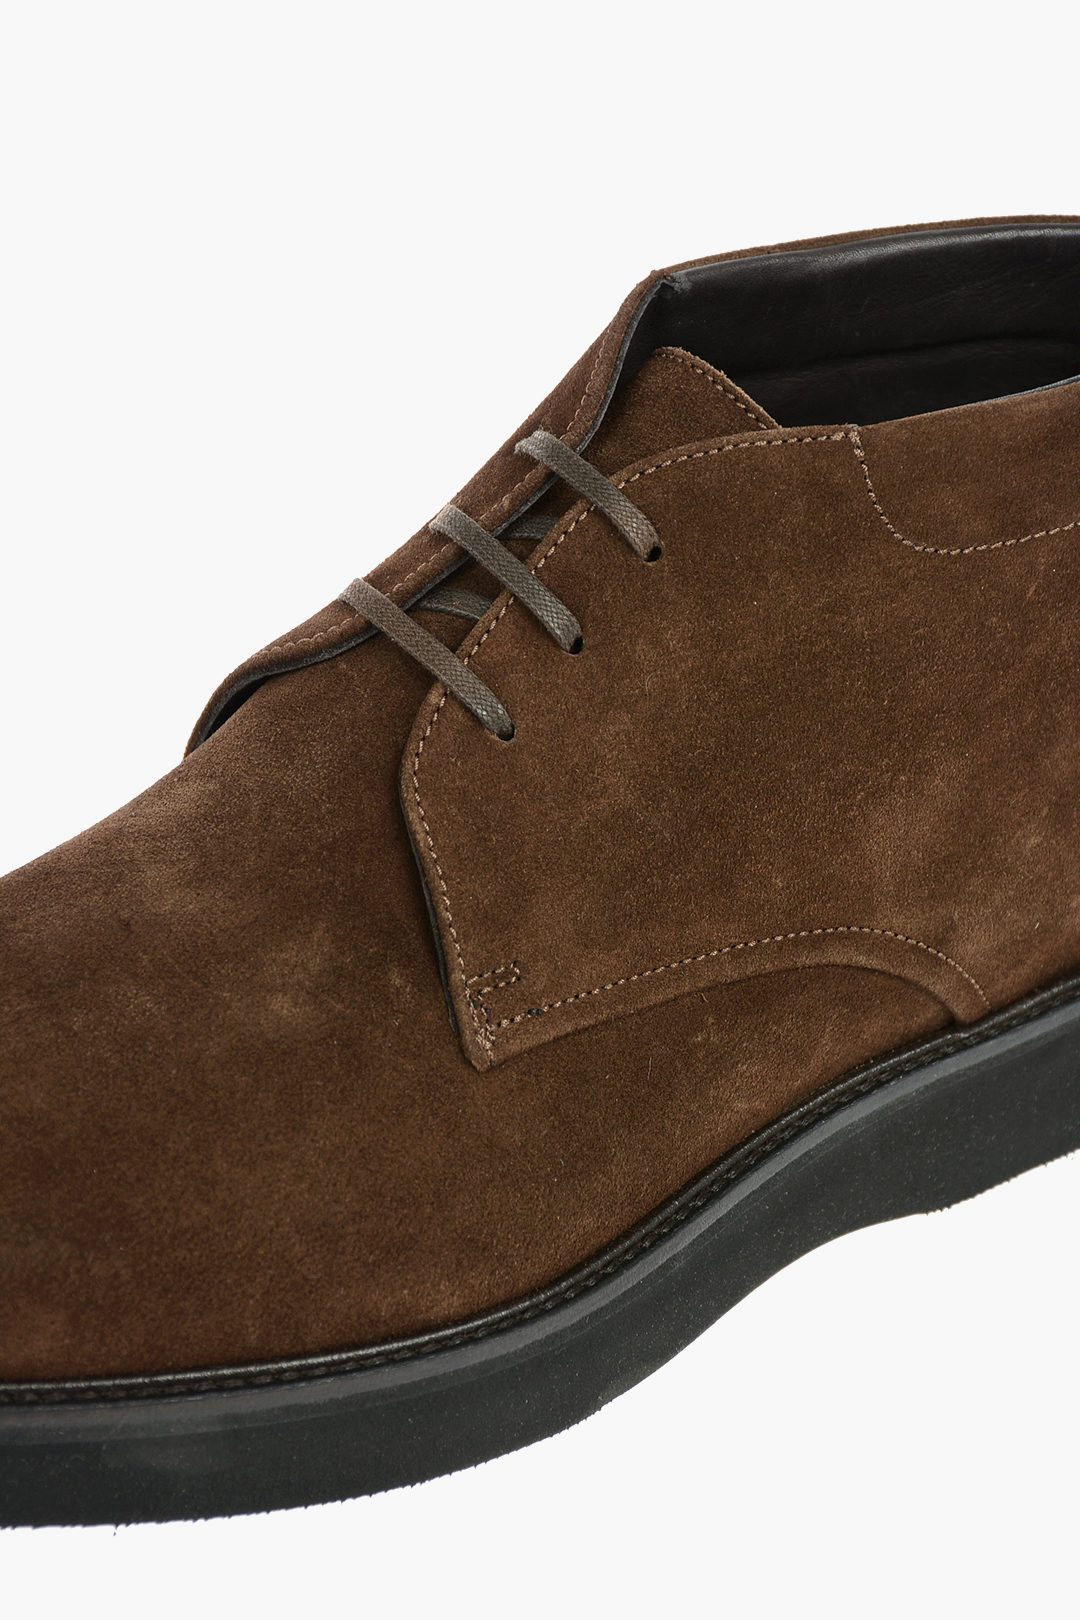 Corneliani Suede Leather Desert Boots With Rubber Soles men - Glamood ...